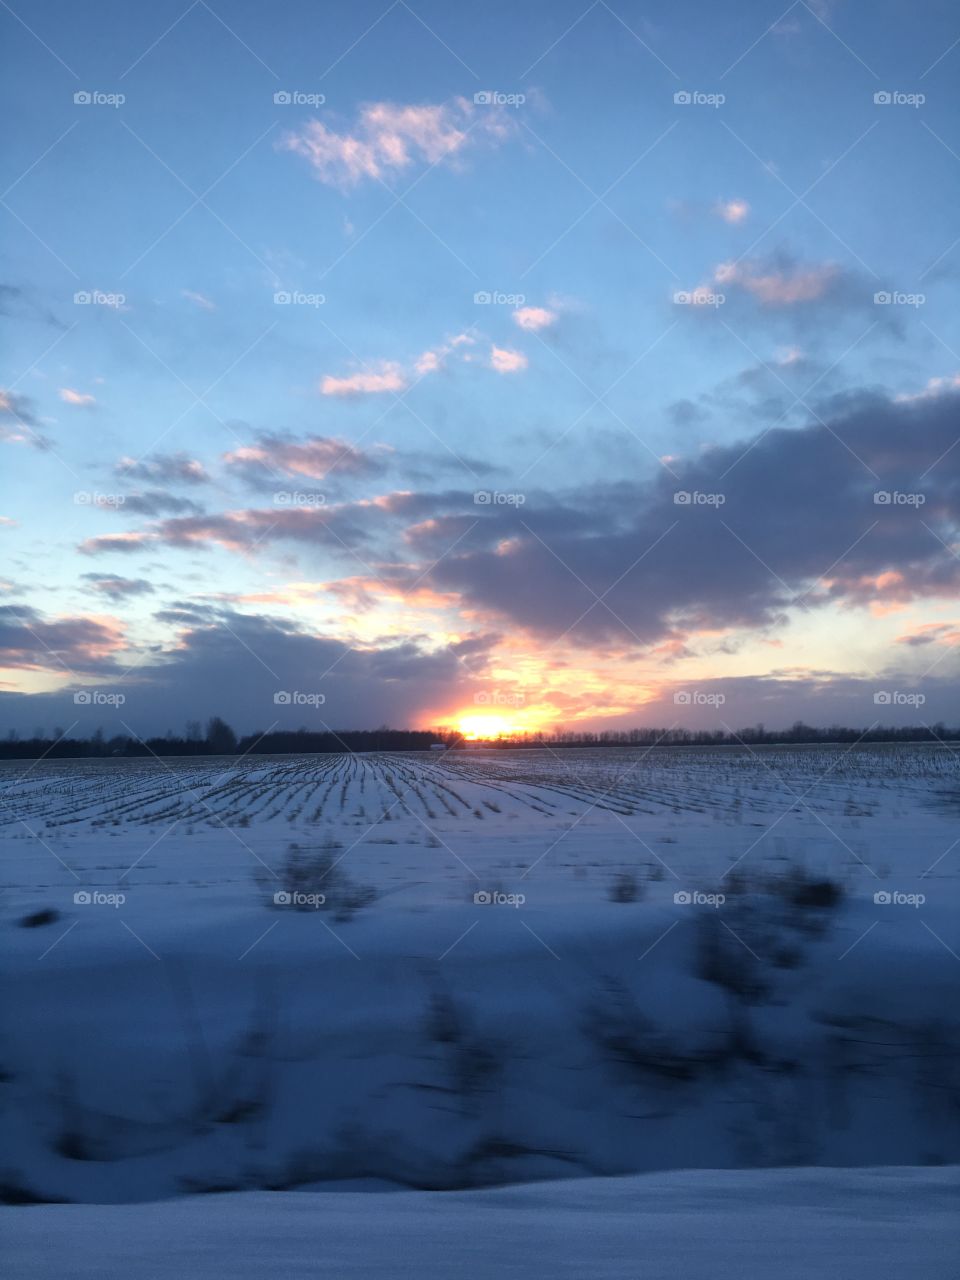 The sun sets past a snow-covered field.